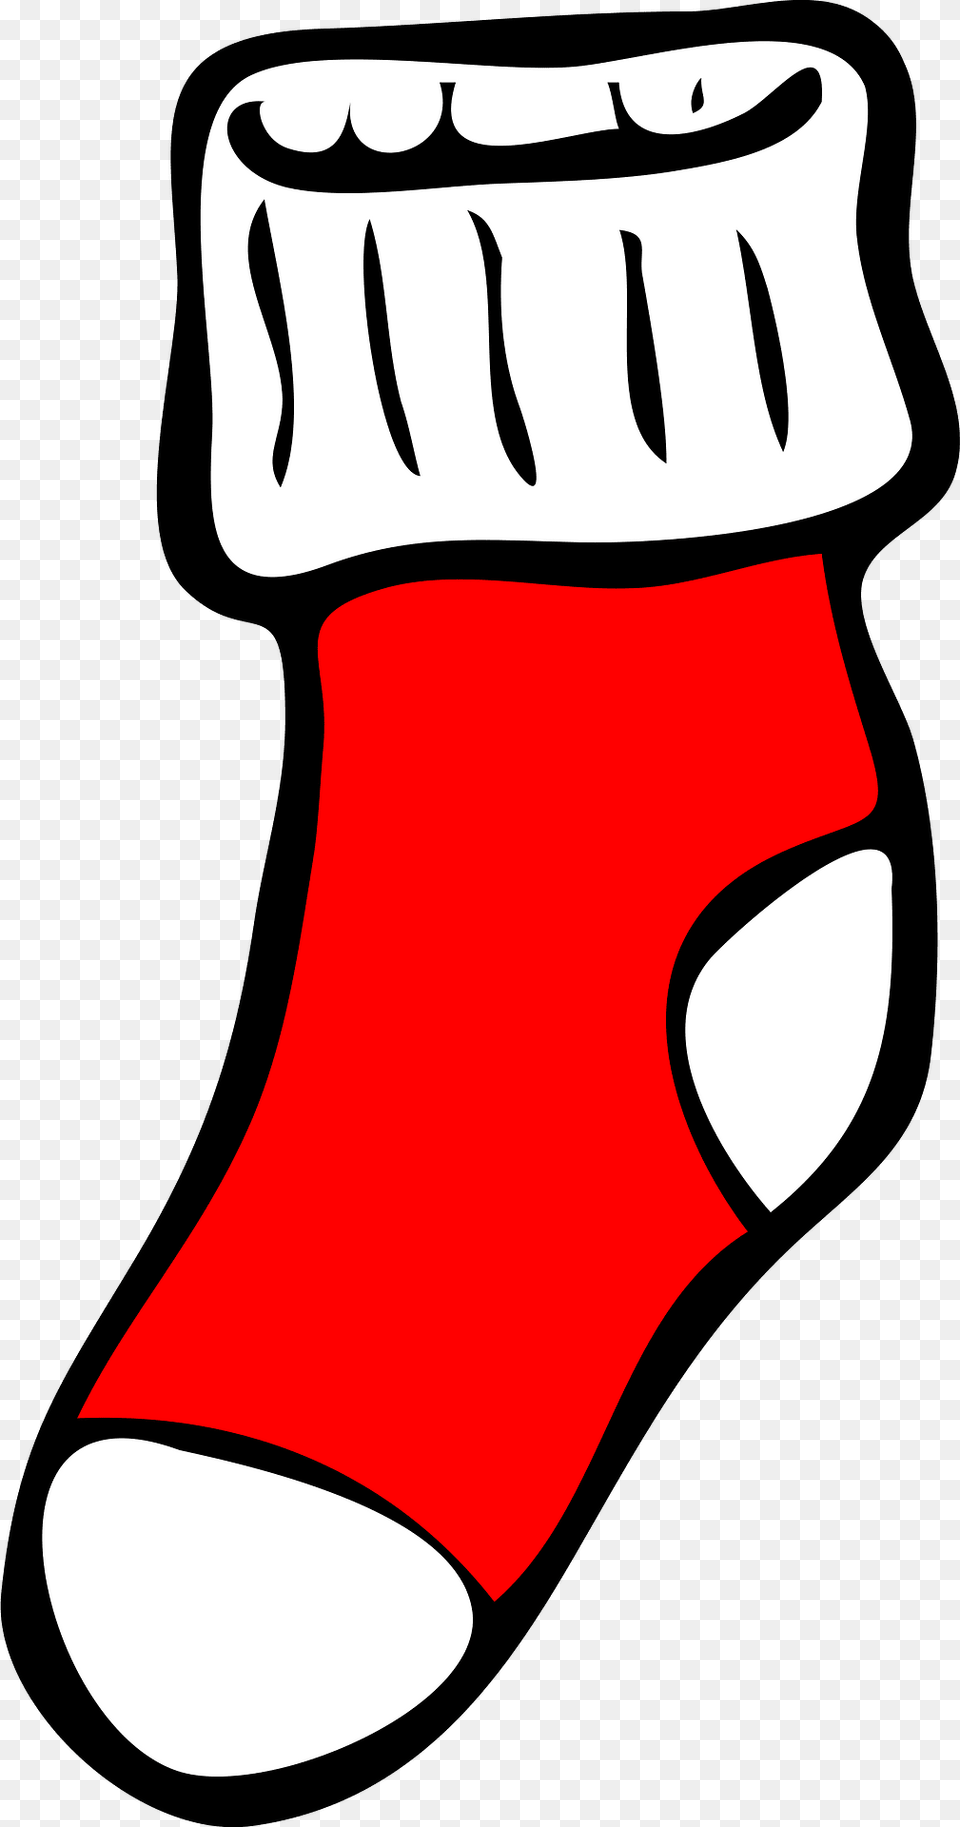 Stocking Clipart, Clothing, Hosiery, Christmas, Christmas Decorations Free Transparent Png